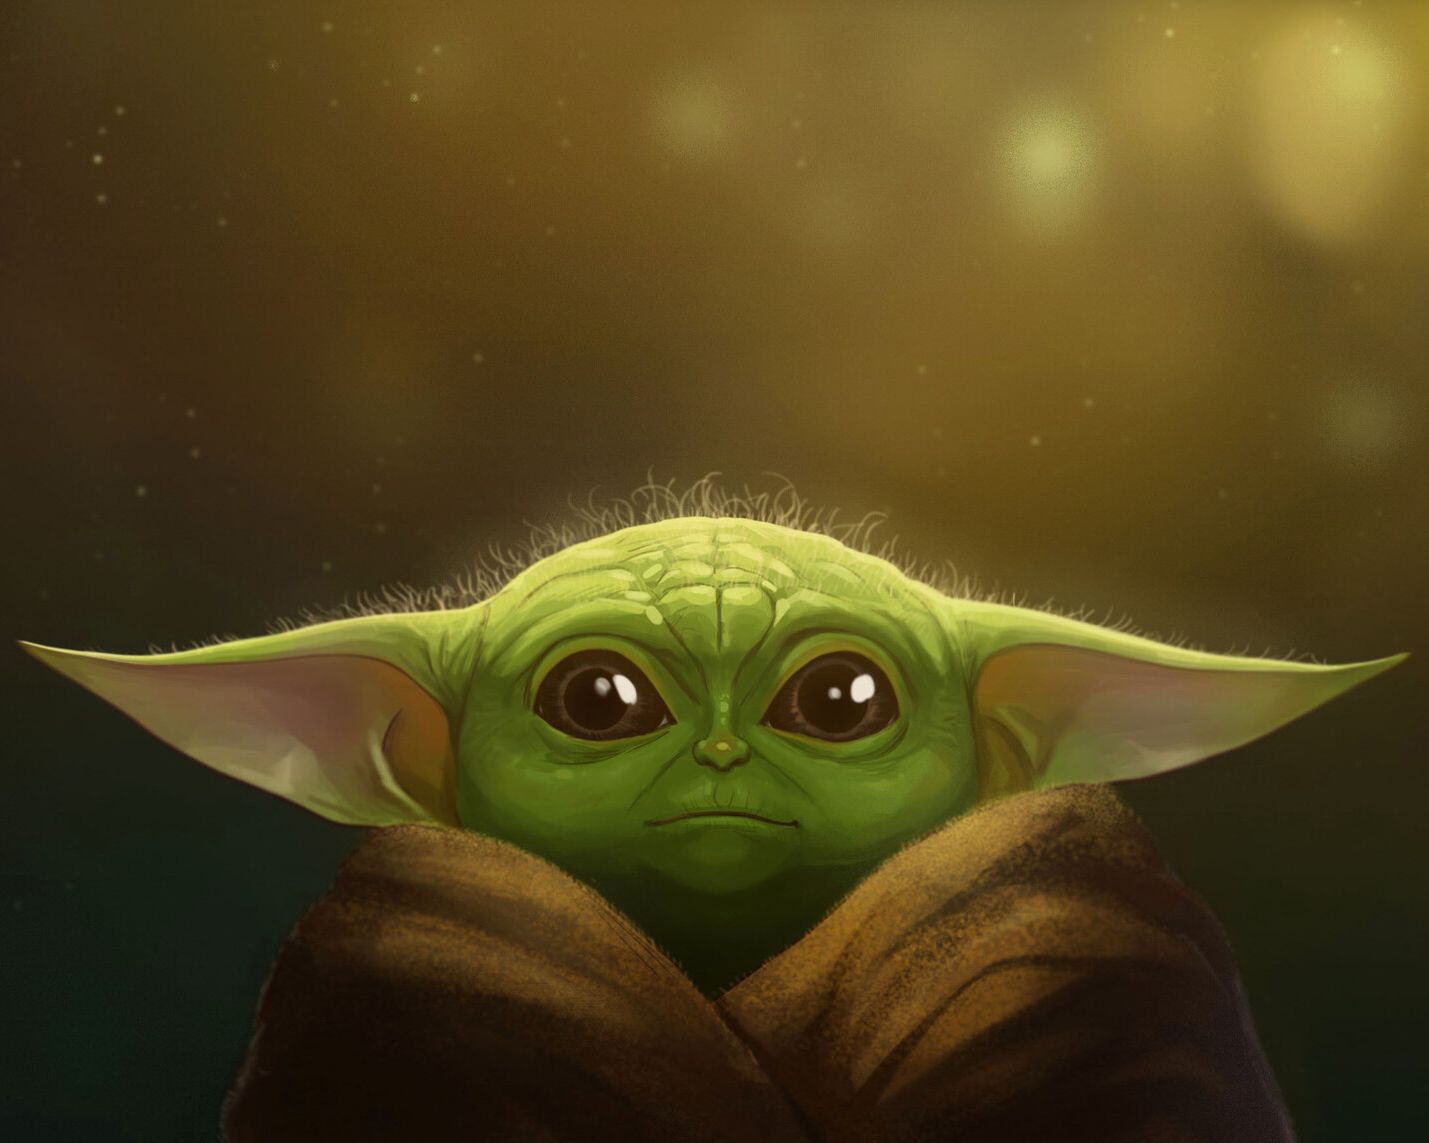 This cute baby yoda poster is so adorable! #baby #yoda #mandalorian. Yoda wallpaper, Yoda poster, Yoda image